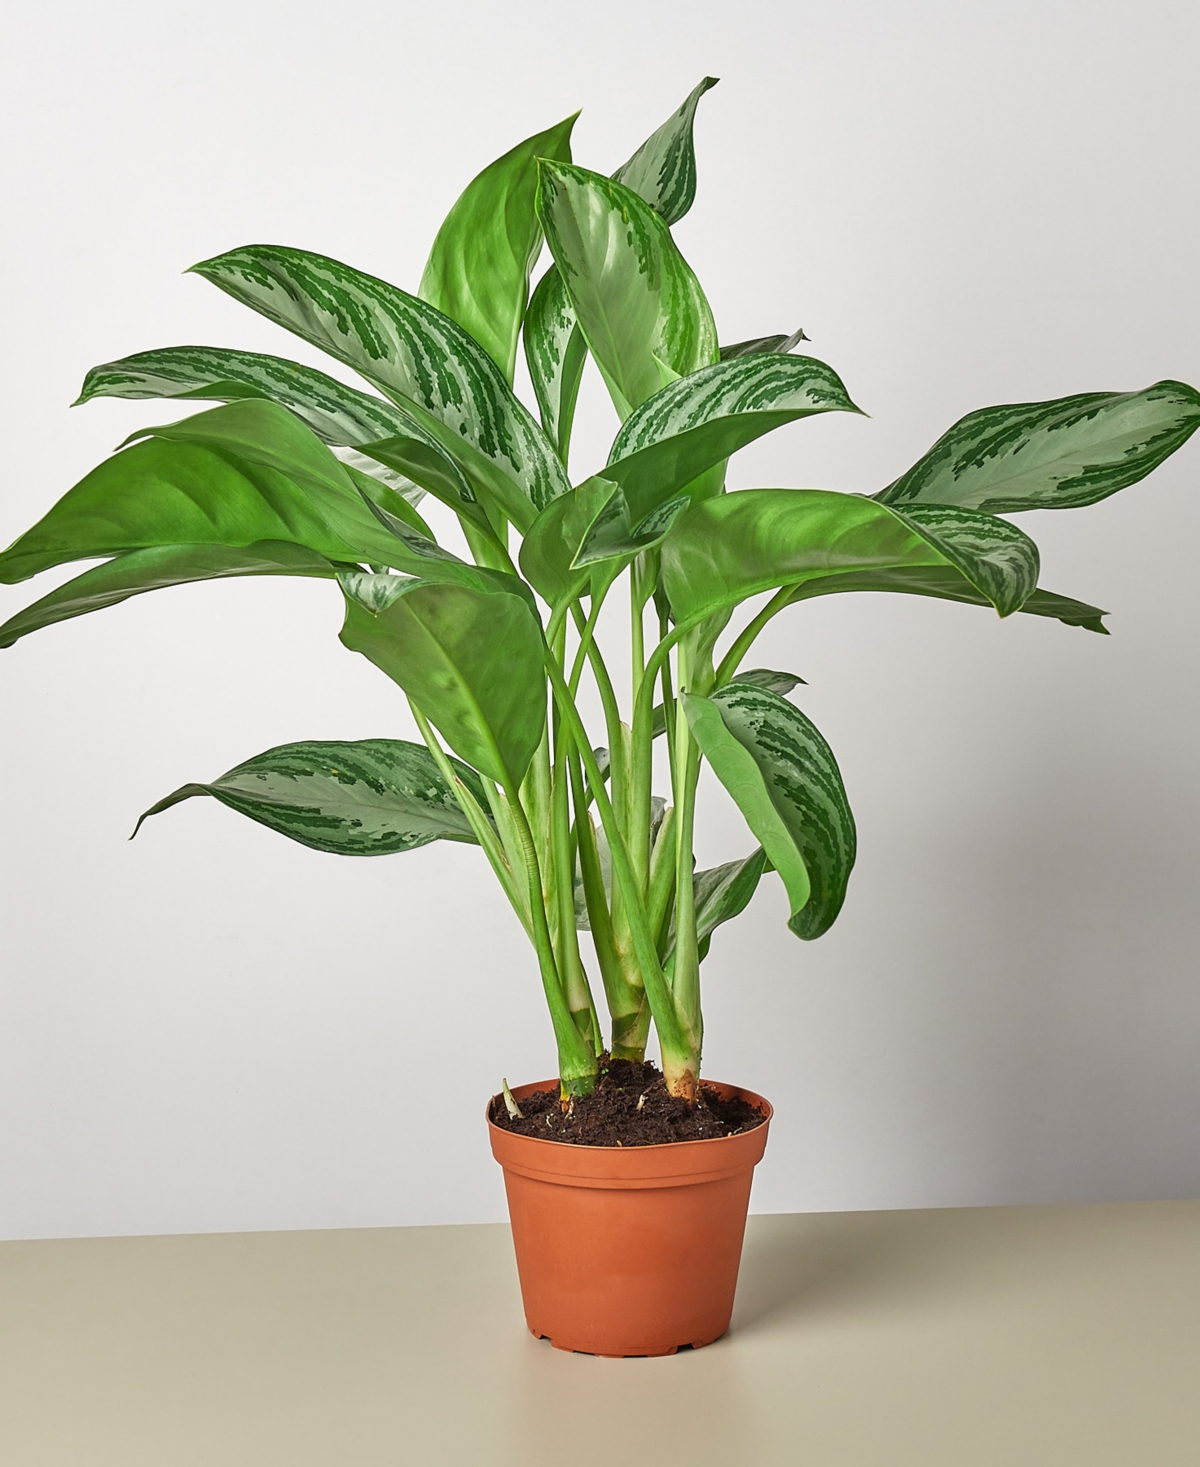 Chinese Evergreen 'Silver Bay' Live Plant, 6" Pot